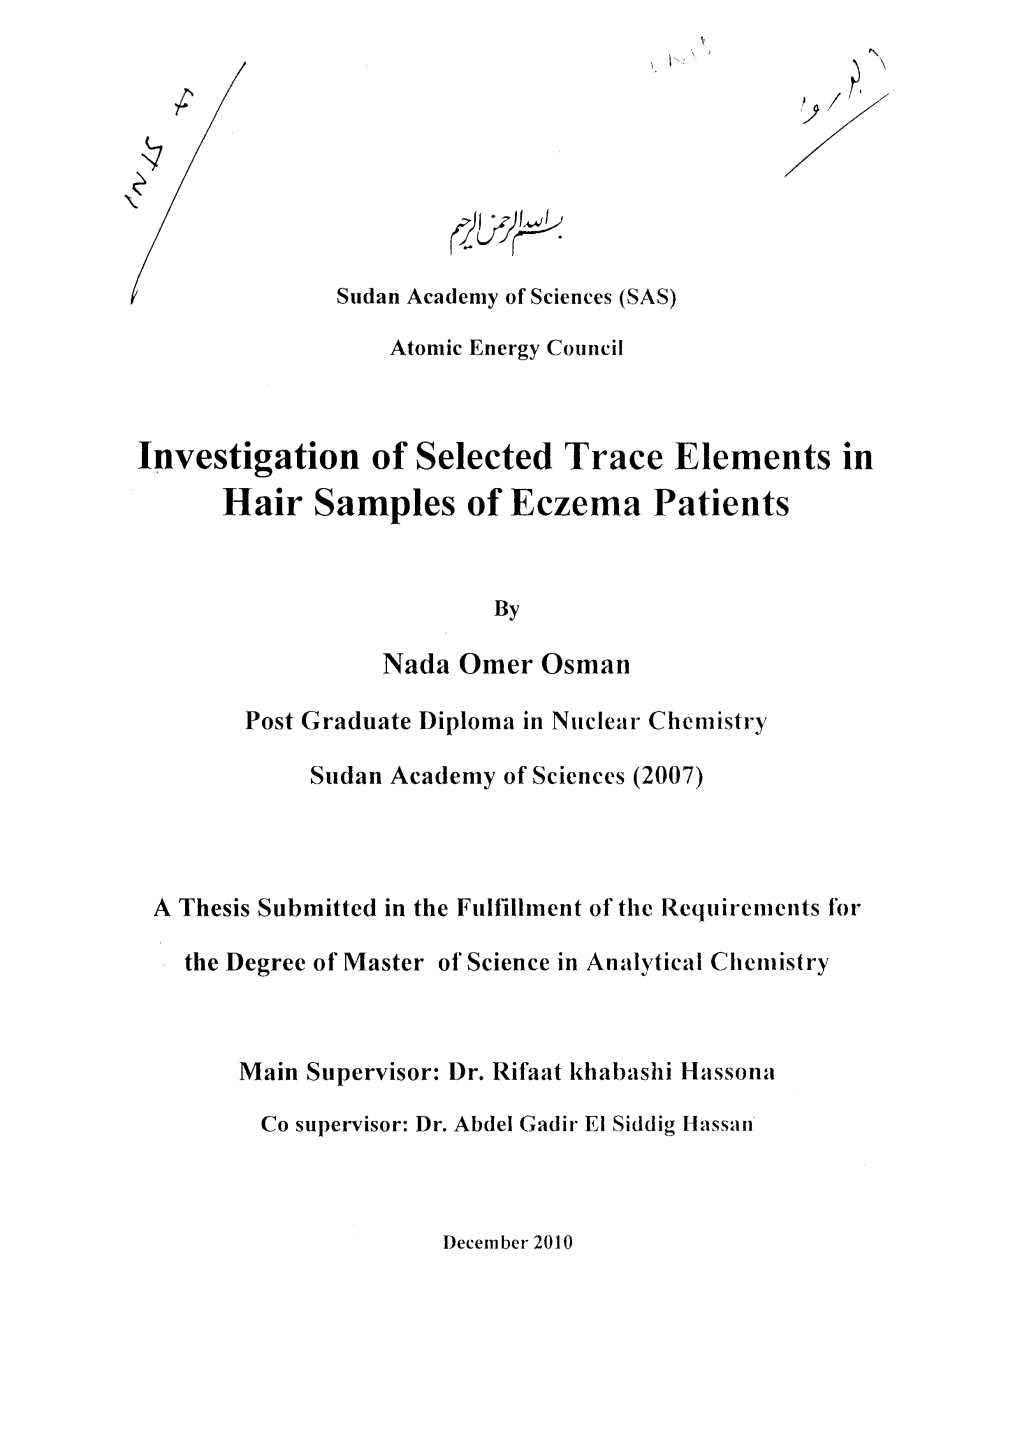 Investigation of Selected Trace Elements in Hair Samples of Eczema Patients